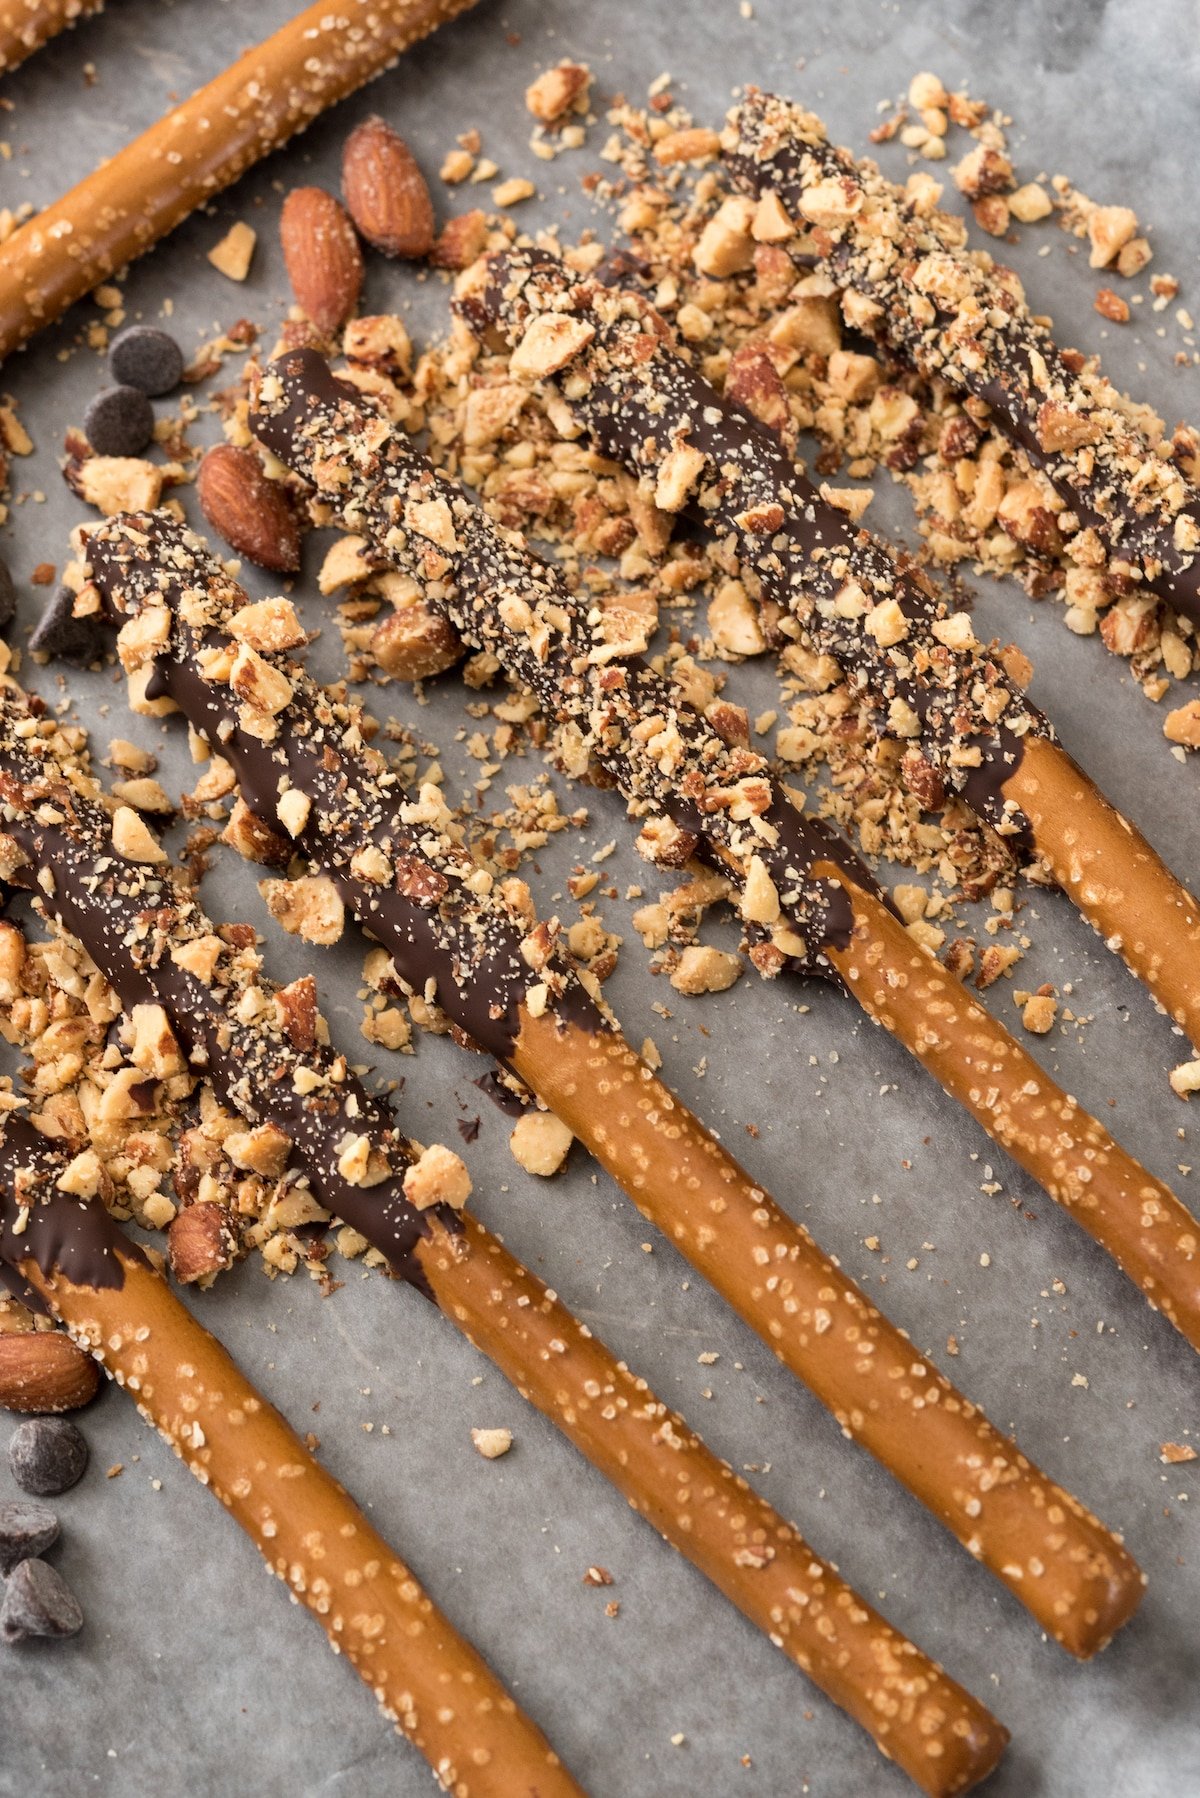 pretzel sticks dipped in chocolate and almonds